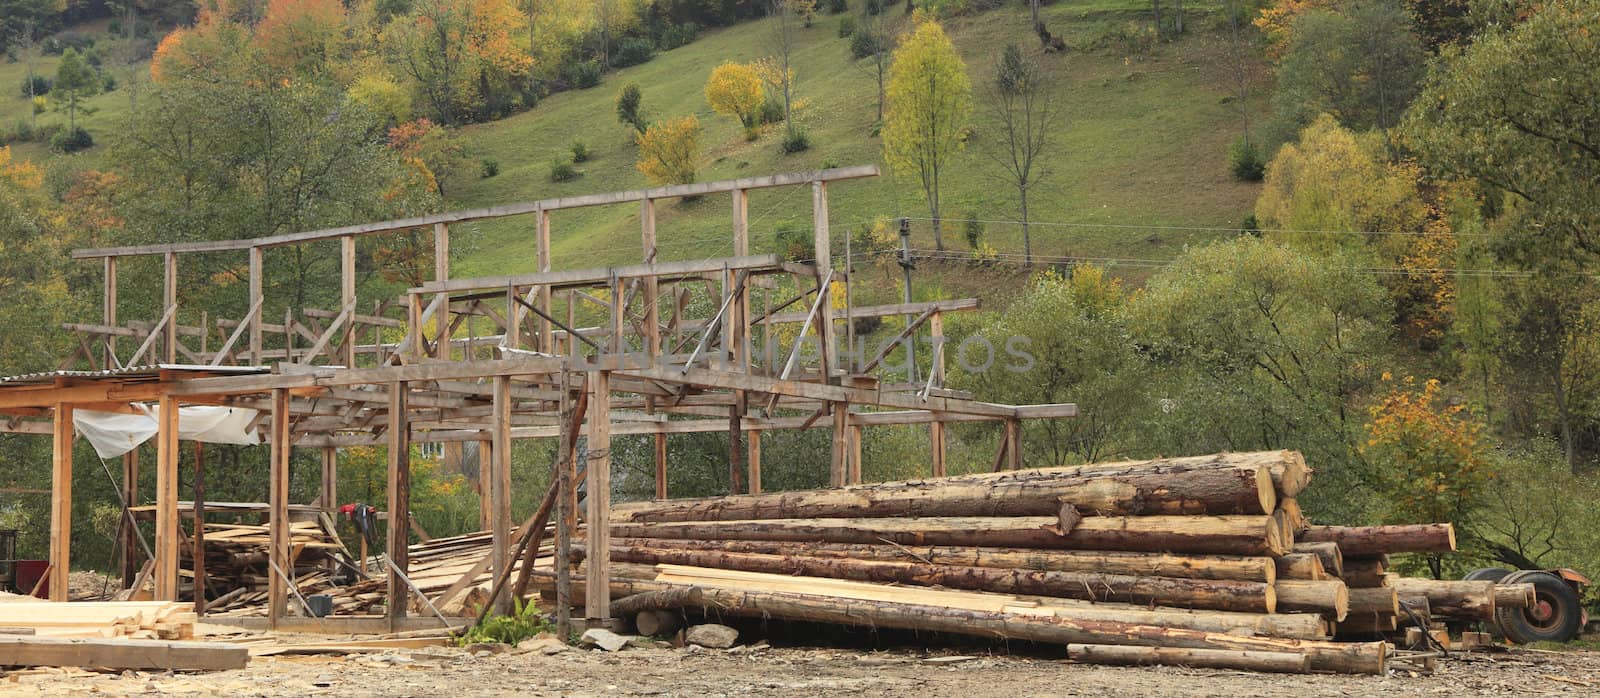 Timber production place by RazvanPhotography